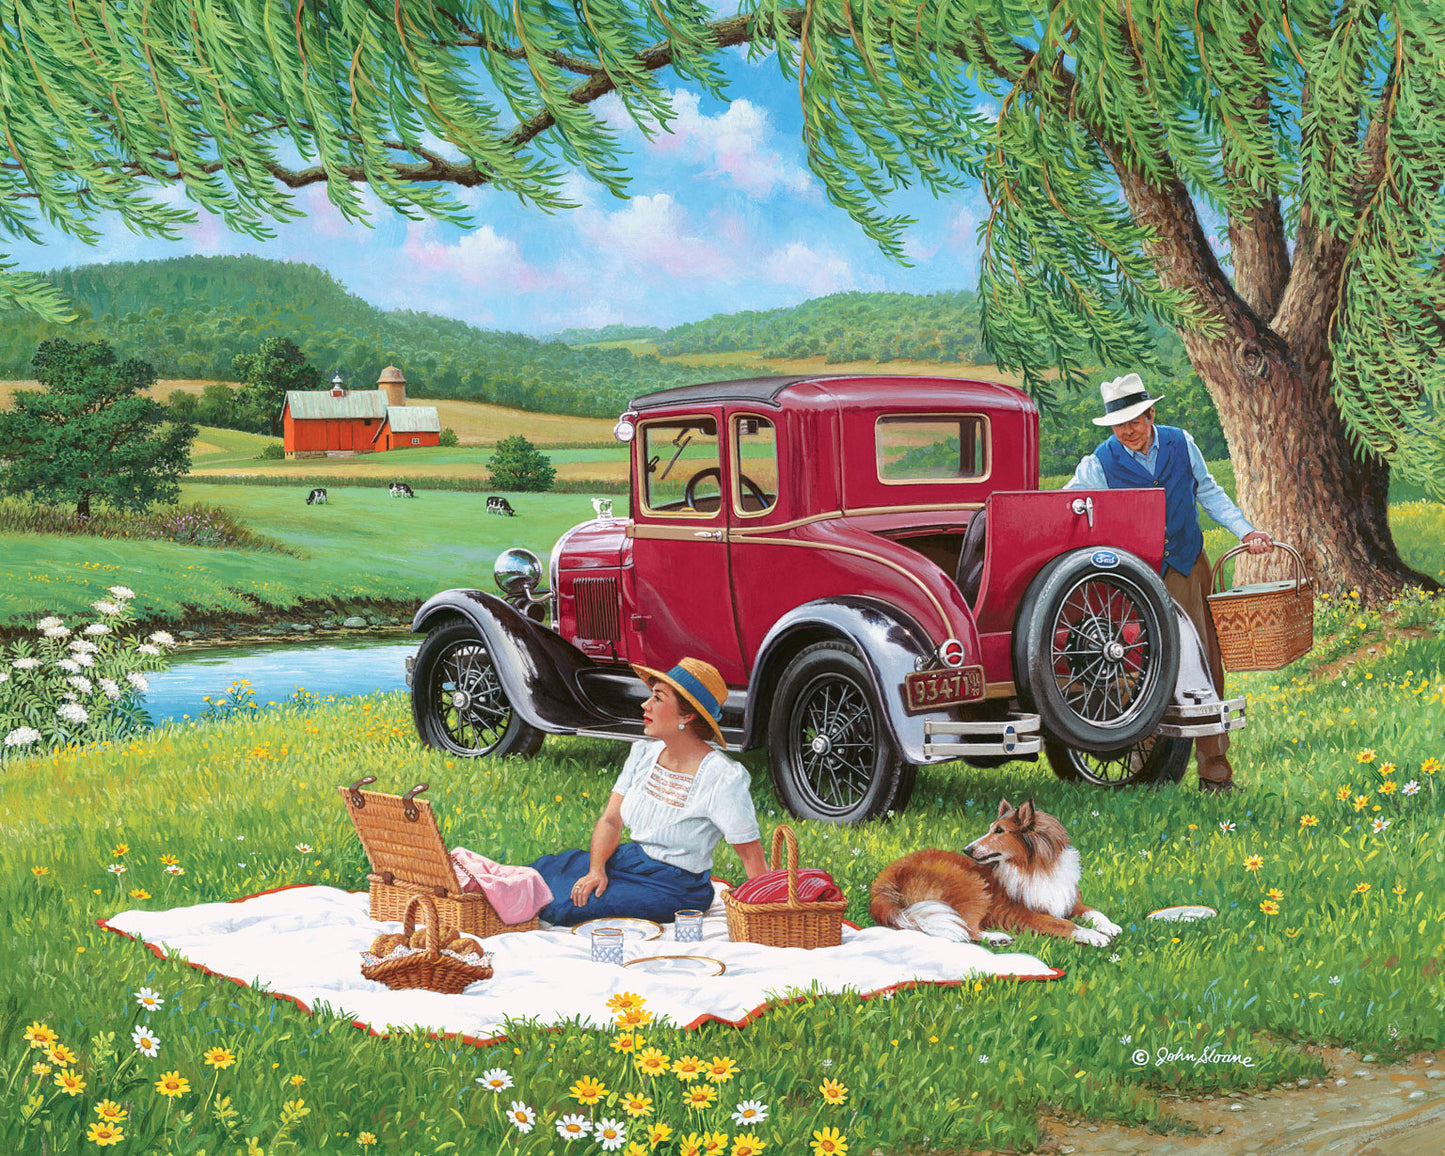 Far From the Crowd - Puzzle by John Sloane